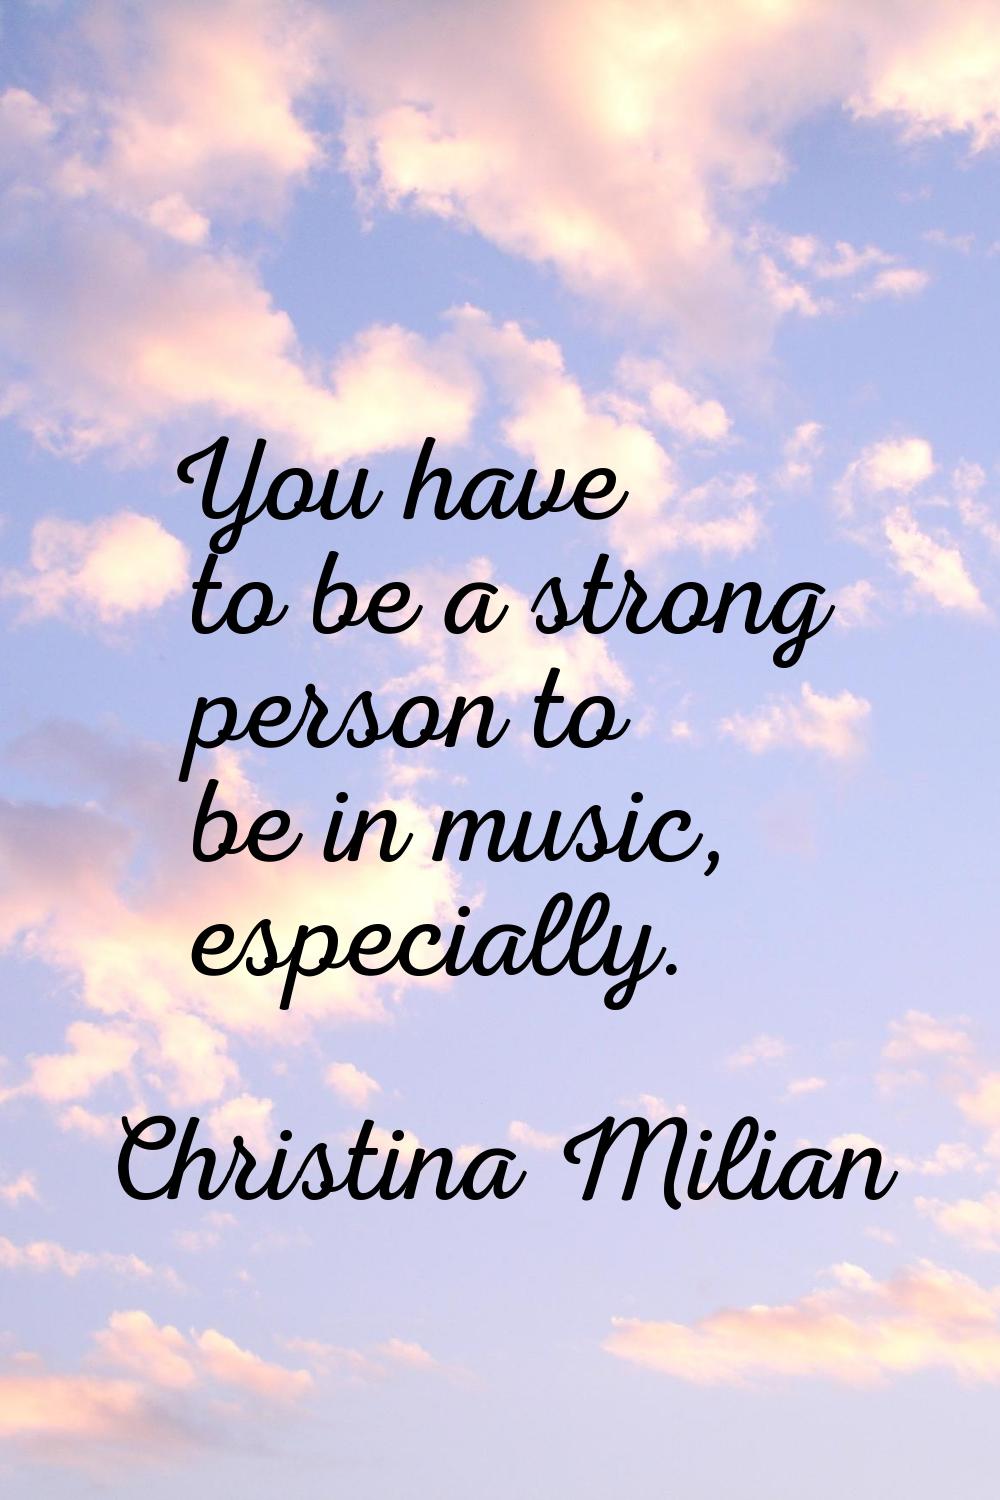 You have to be a strong person to be in music, especially.